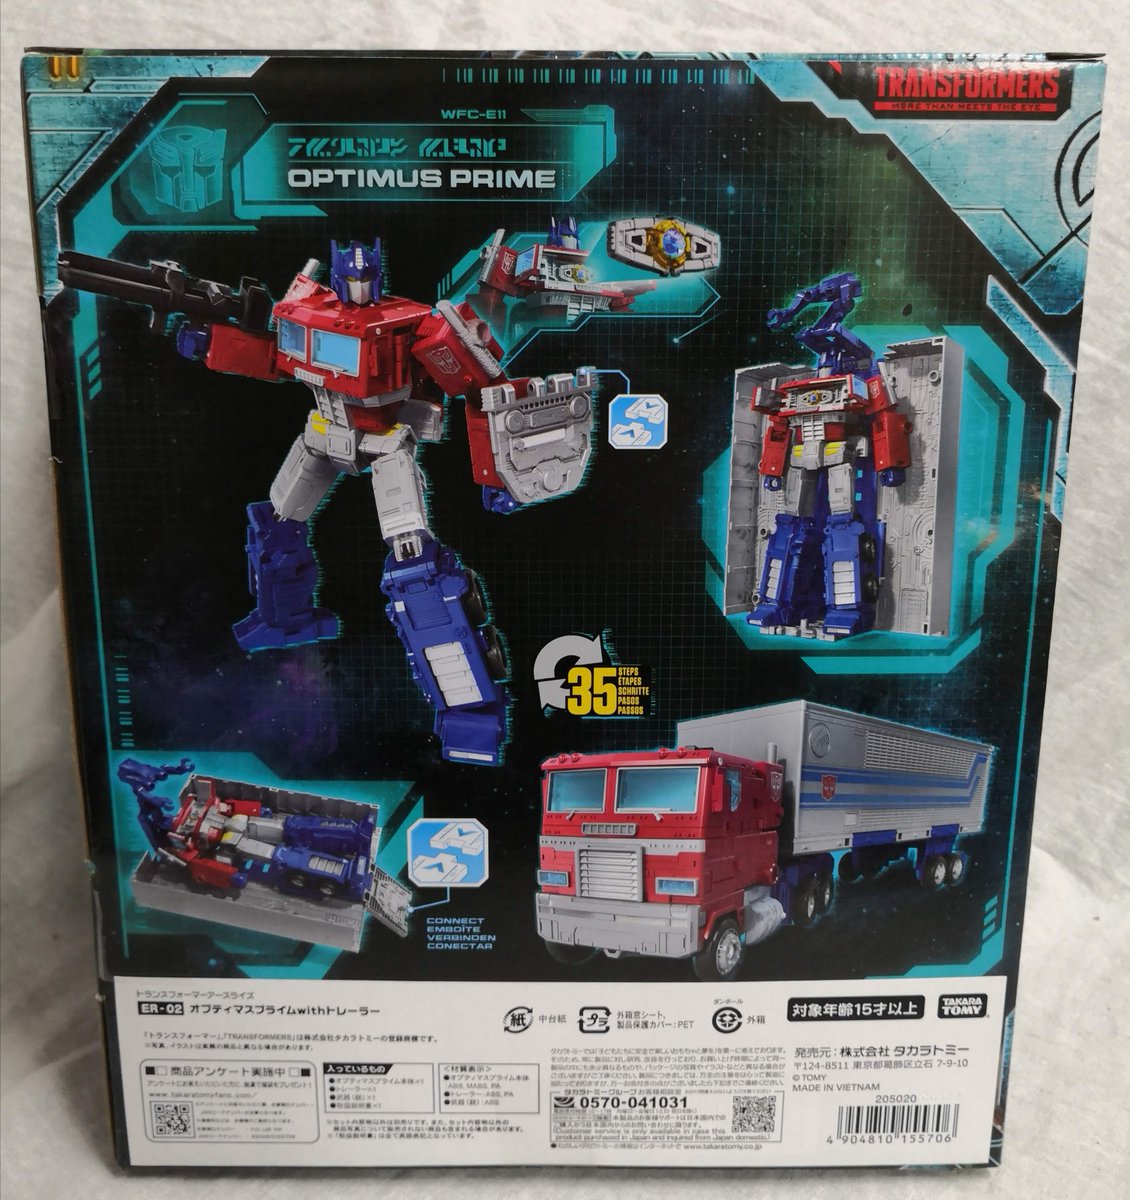 The Japanese Games Hobby Import Specialist Transformers Eearthrise Er 02 Optimus Prime With Trailer Takara Tomy In Stock T Co Etpitfbtr6